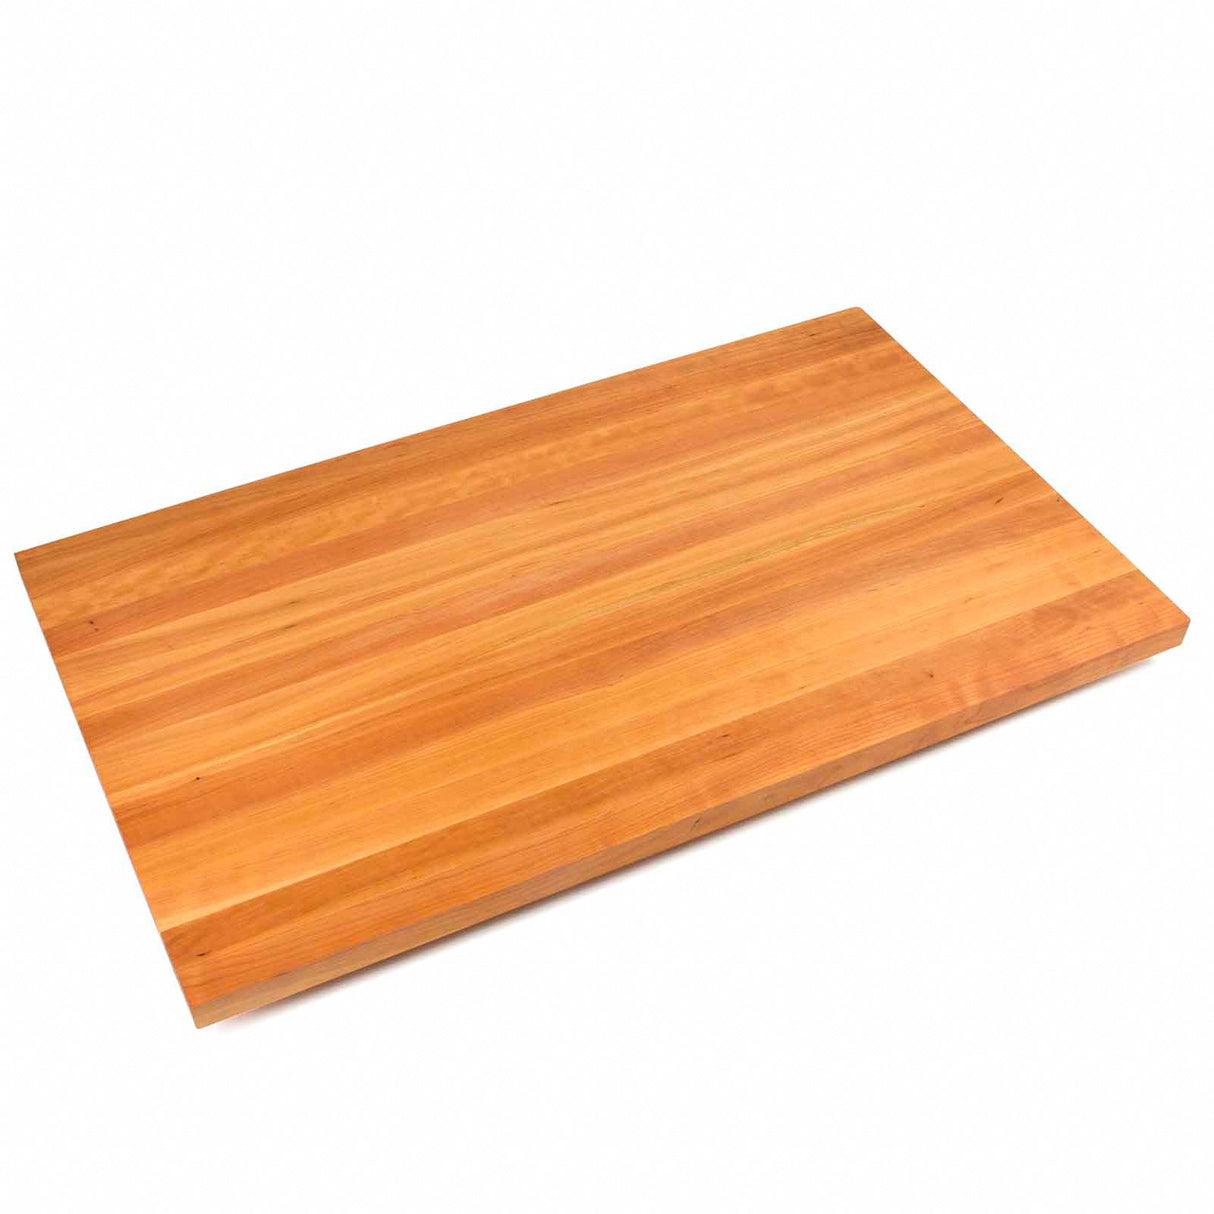 John Boos CHYKCT6042-O Cherry Kitchen Counter Top with Oil Finish, 1.5" Thickness, 60" x 42"